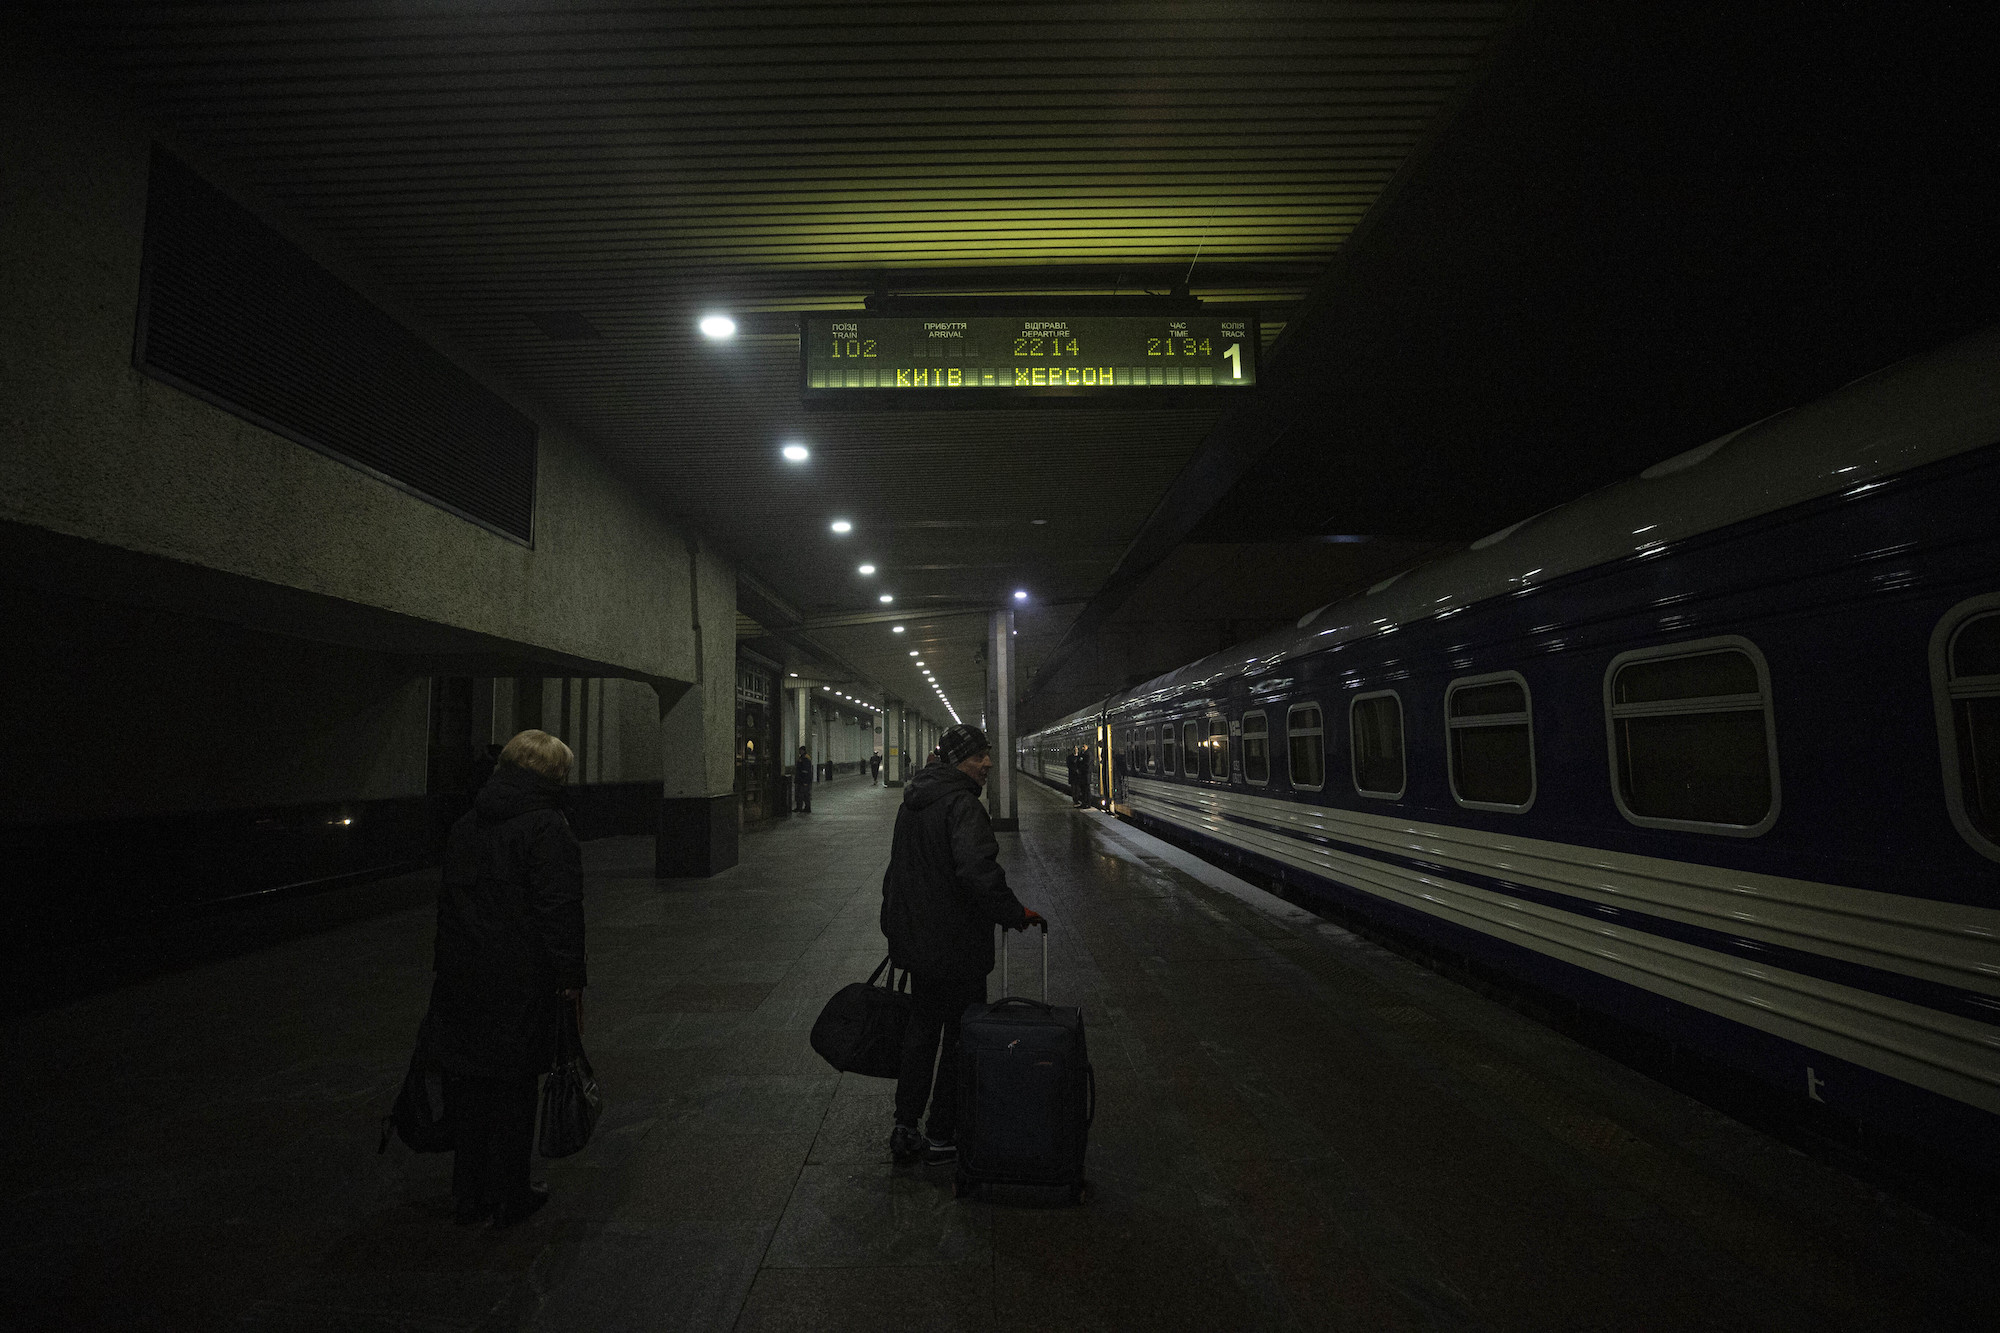 A passenger train to Kherson departs from Kyiv train station on Thursday.